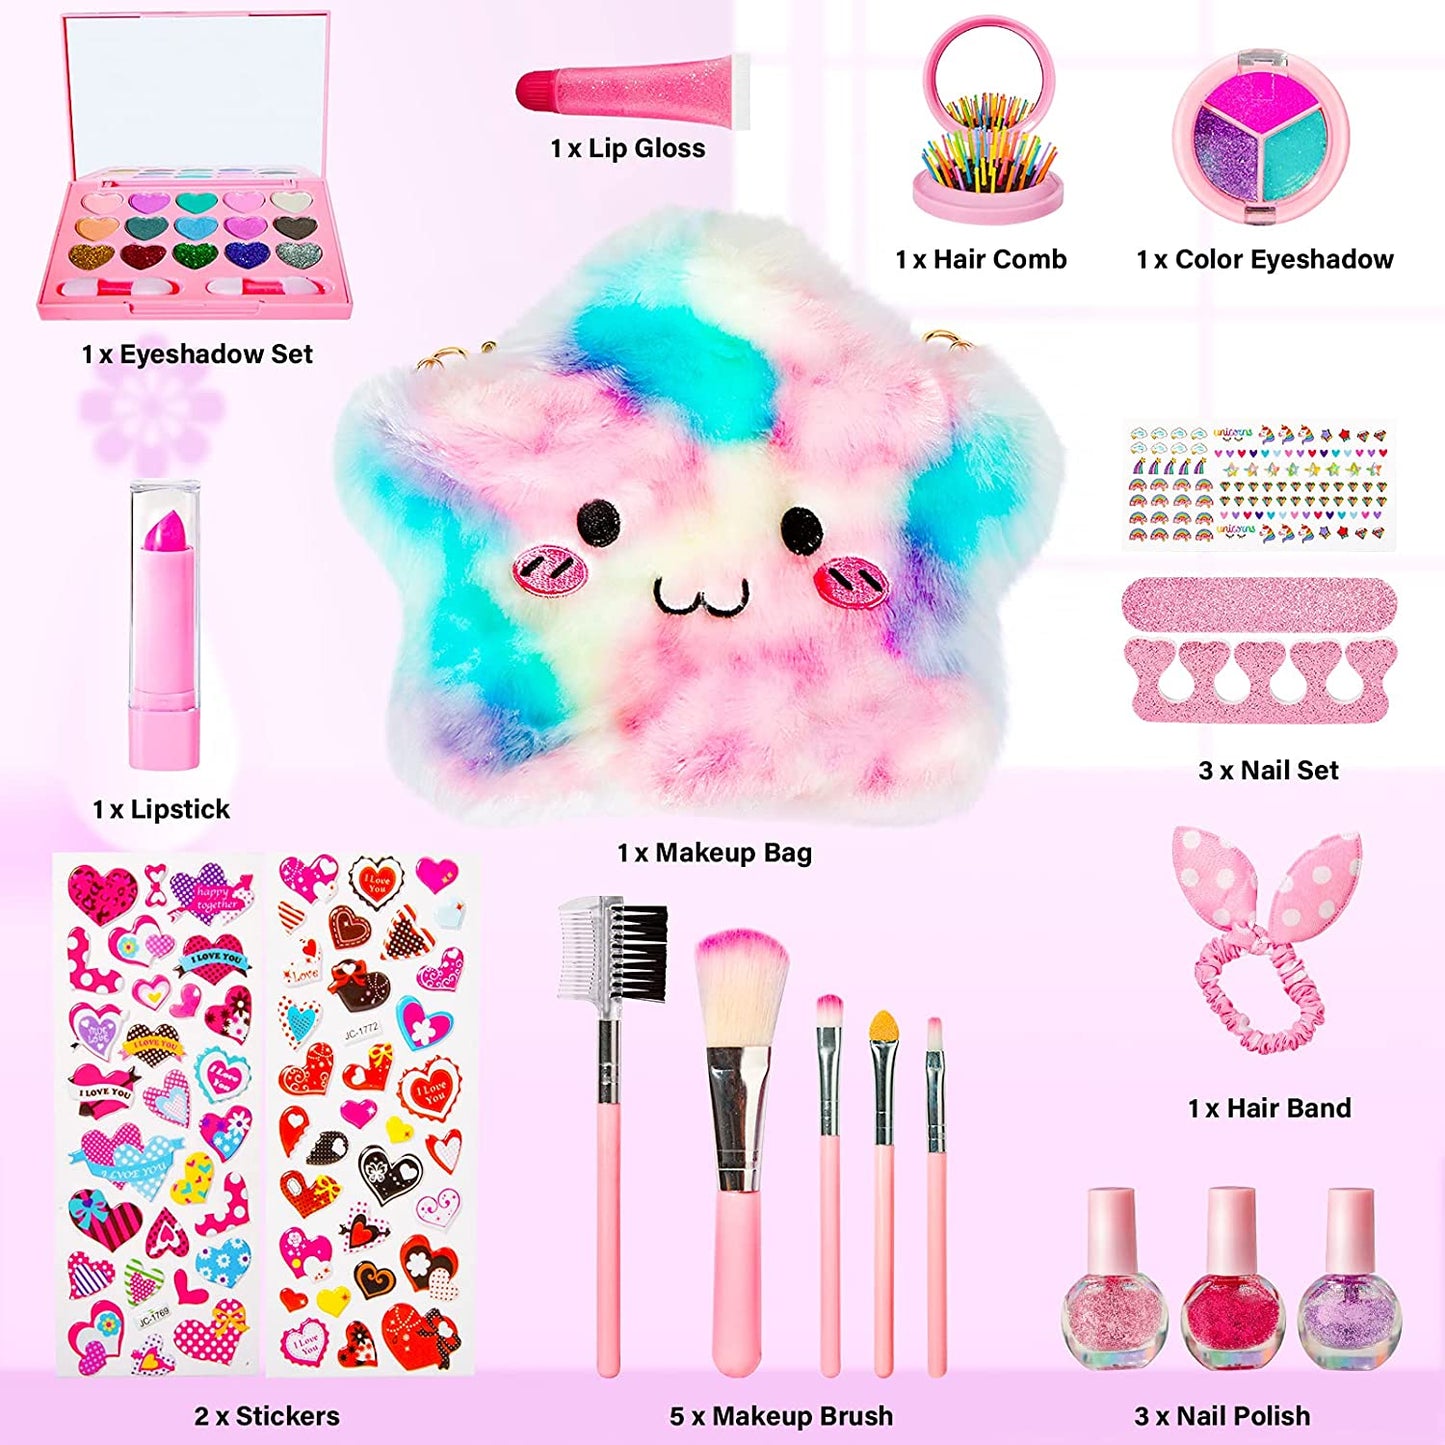 Kids Makeup Kit for Girls 2021 New Upgrade, Pretend Play Toys Washable Make Up Set with Cosmetics Bag Lipstick,Brush,Mirror, Halloween Christmas Party Birthday Gift Toys for Girl Aged 3 4 5 6 7 8